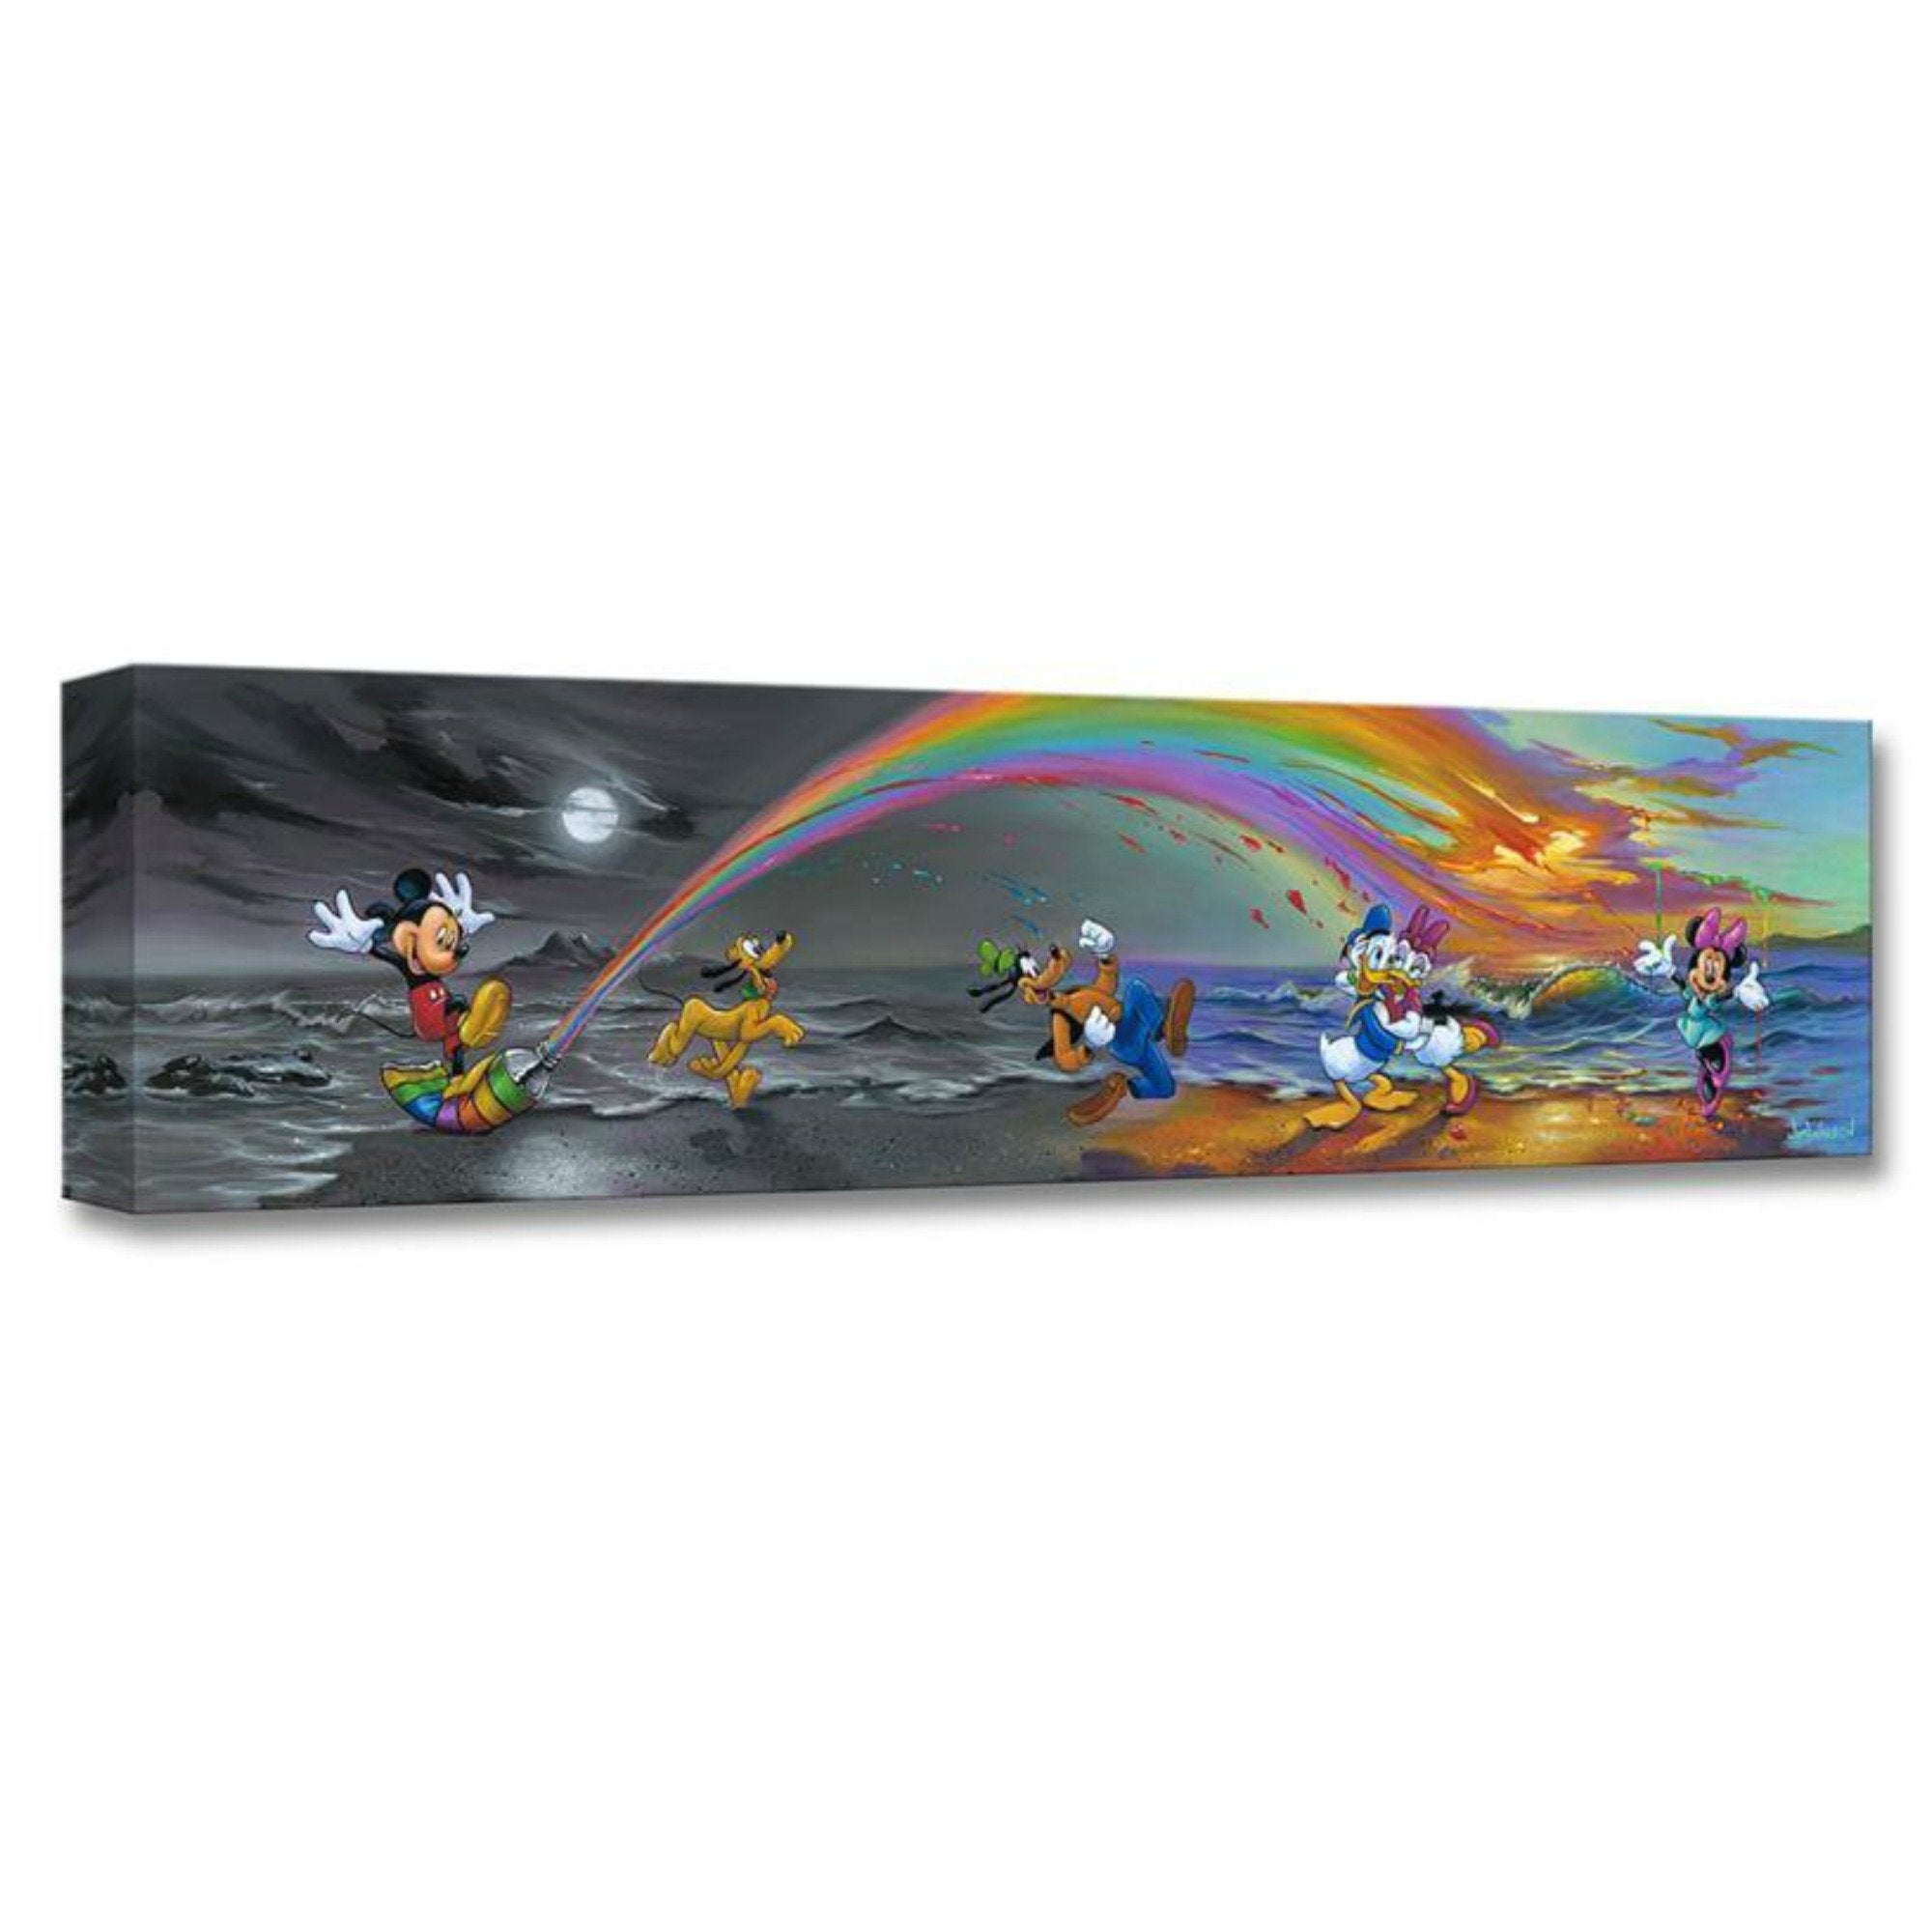 Mickey Makes Our Day by Jim Warren  Mickey squirts a rainbow of color paint over the top of Minnie, Donald, and Daisy, as they play around at the bench.